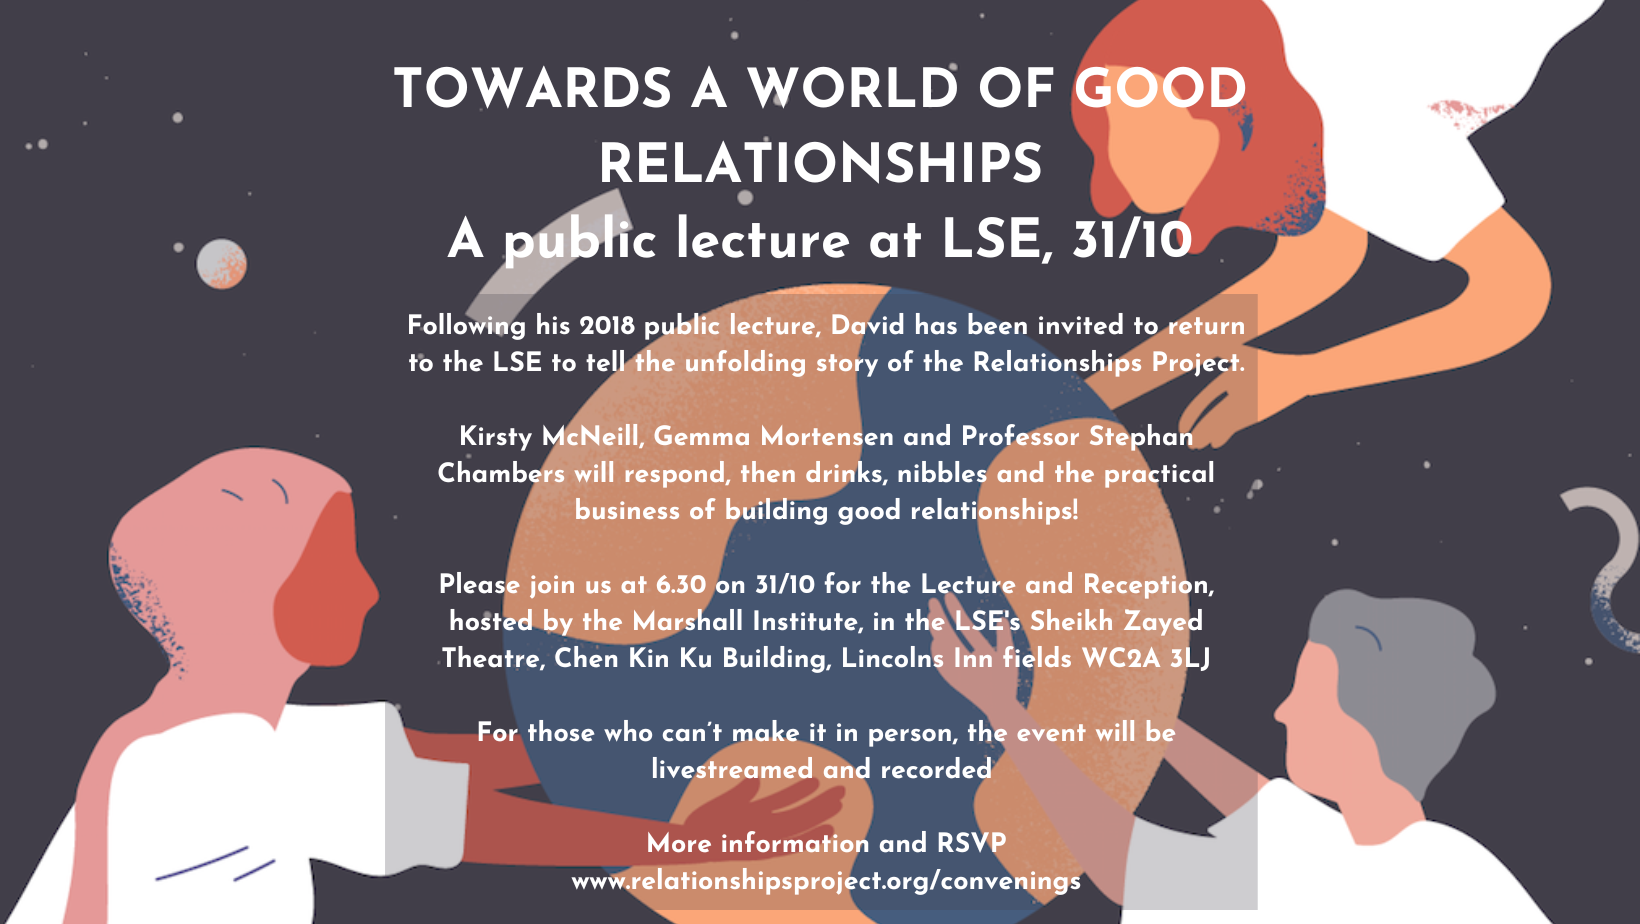 Towards a world of good relationships:A public lecture at LSE, 31/10. Following his 2018 public lecture, David has been invited to return to the LSE to tell the unfolding story of the Relationships Project.  Kirsty McNeill, Gemma Mortensen and Professor Stephan Chambers will respond, then drinks, nibbles and the practical business of building good relationships!  Please join us at 6.30 on 31/10 for the Lecture and Reception, hosted by the Marshall Institute, in the LSE's Sheikh Zayed Theatre, Chen Kin Ku Building, Lincolns Inn fields WC2A 3LJ  For those who can’t make it in person, the event will be livestreamed and recorded   More information and RSVP www.relationshipsproject.org/convenings 